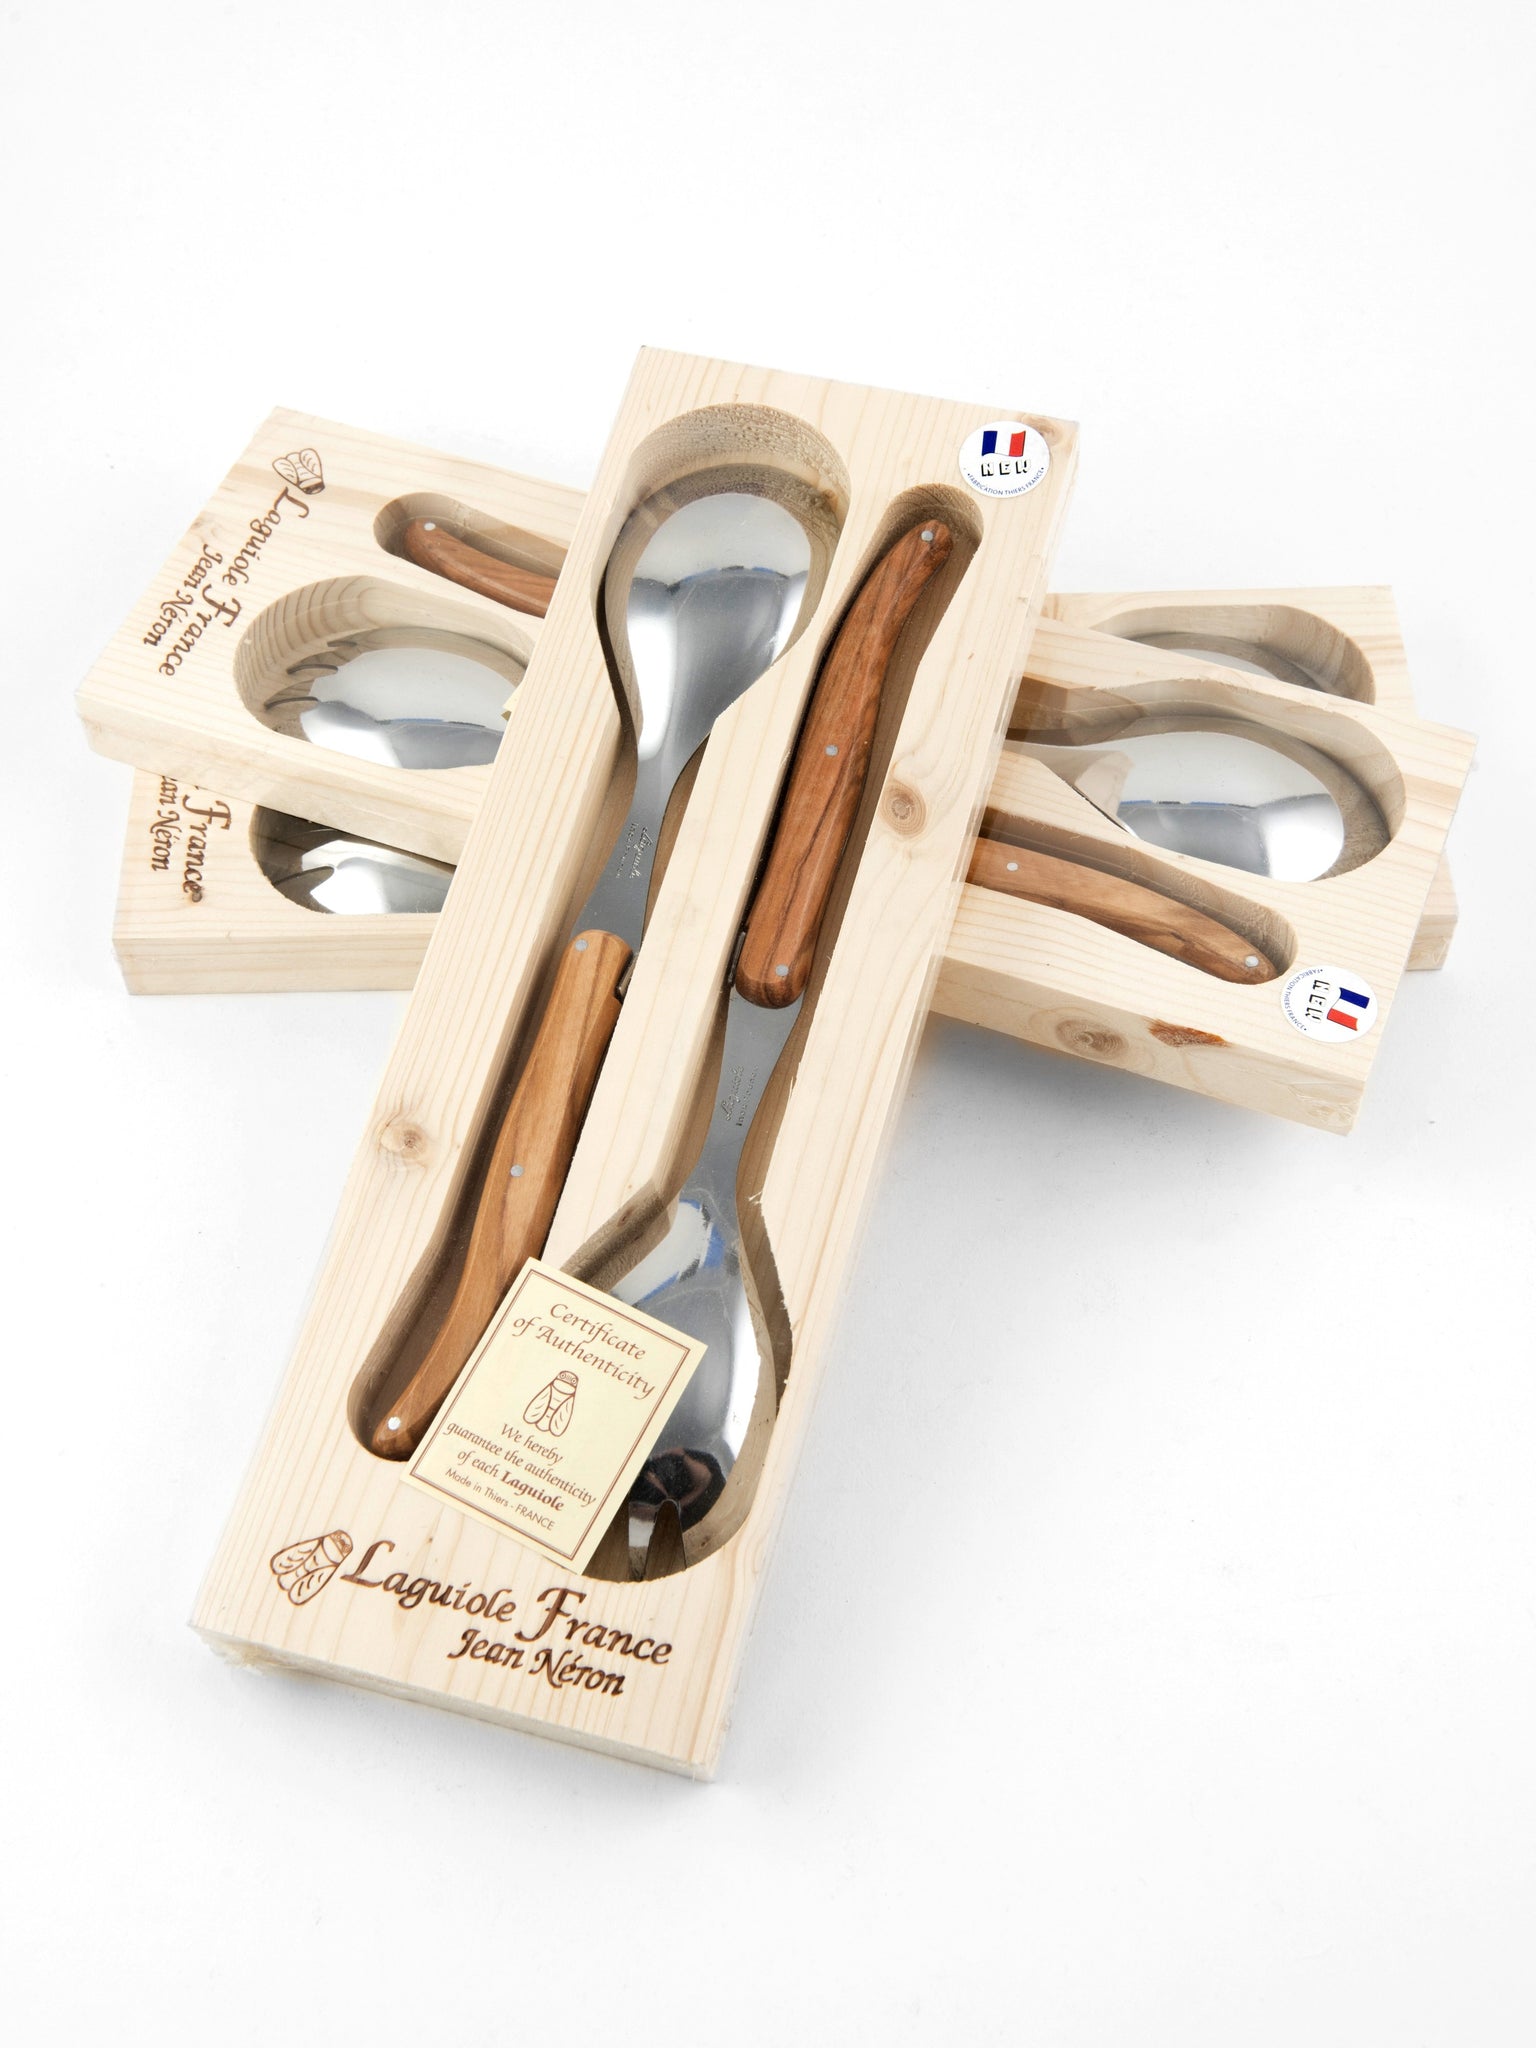 Laguiole French Olivewood Salad Server Set in Wood Box - French Dry Goods